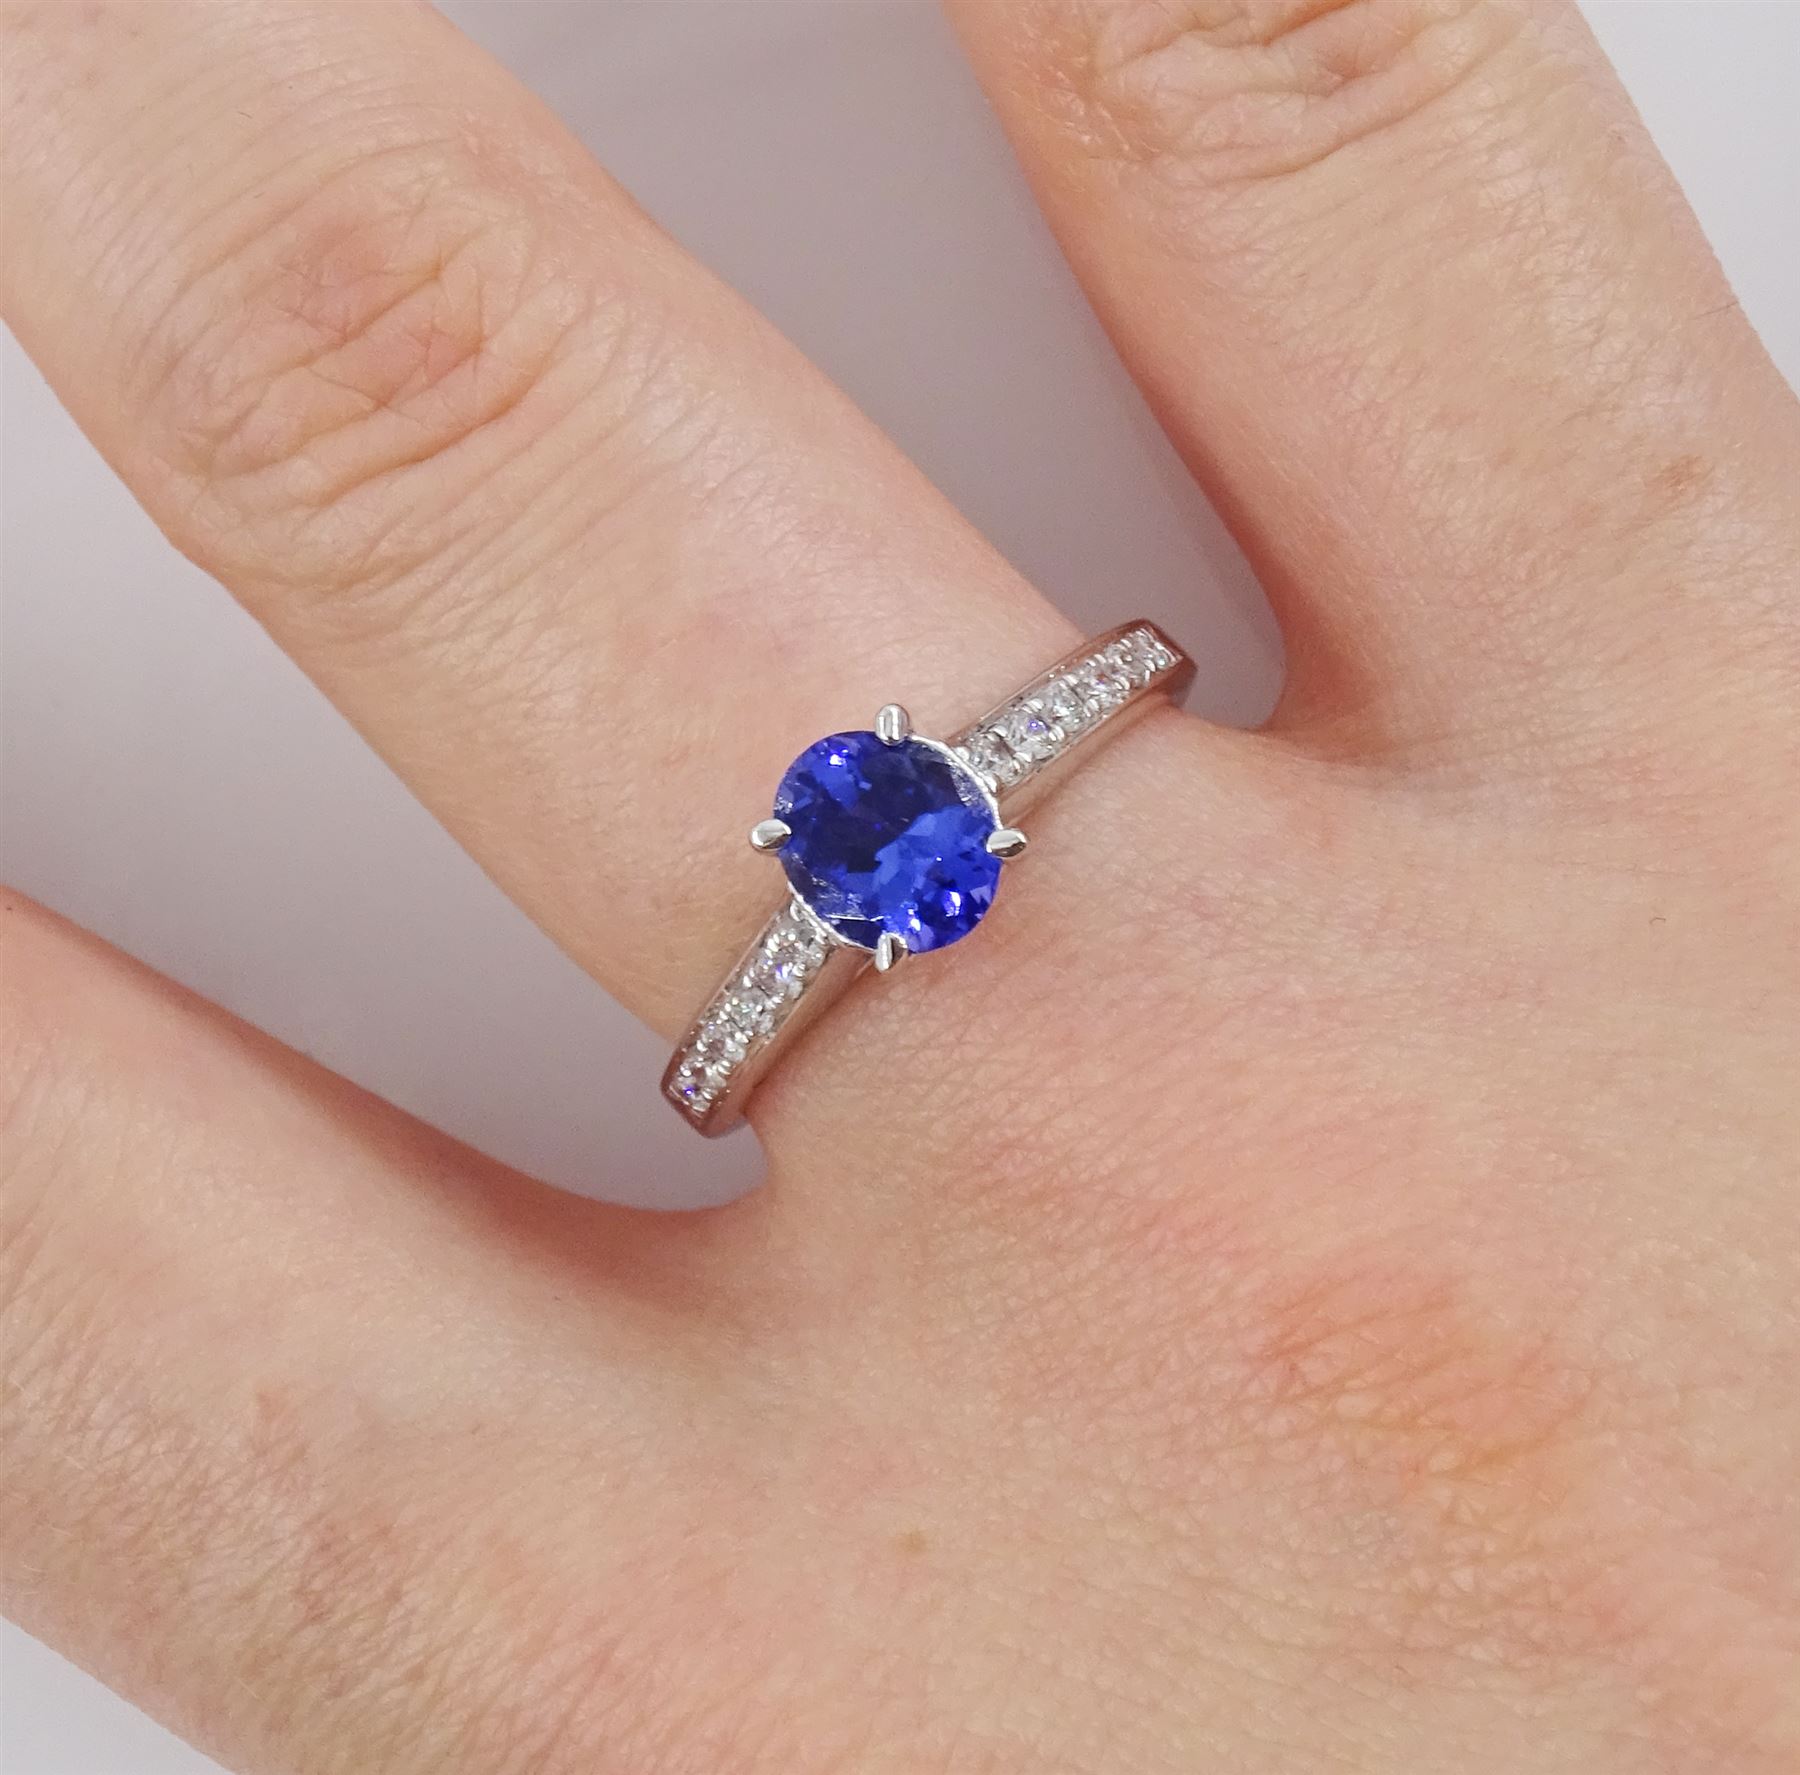 18ct white gold oval tanzanite ring - Image 2 of 4